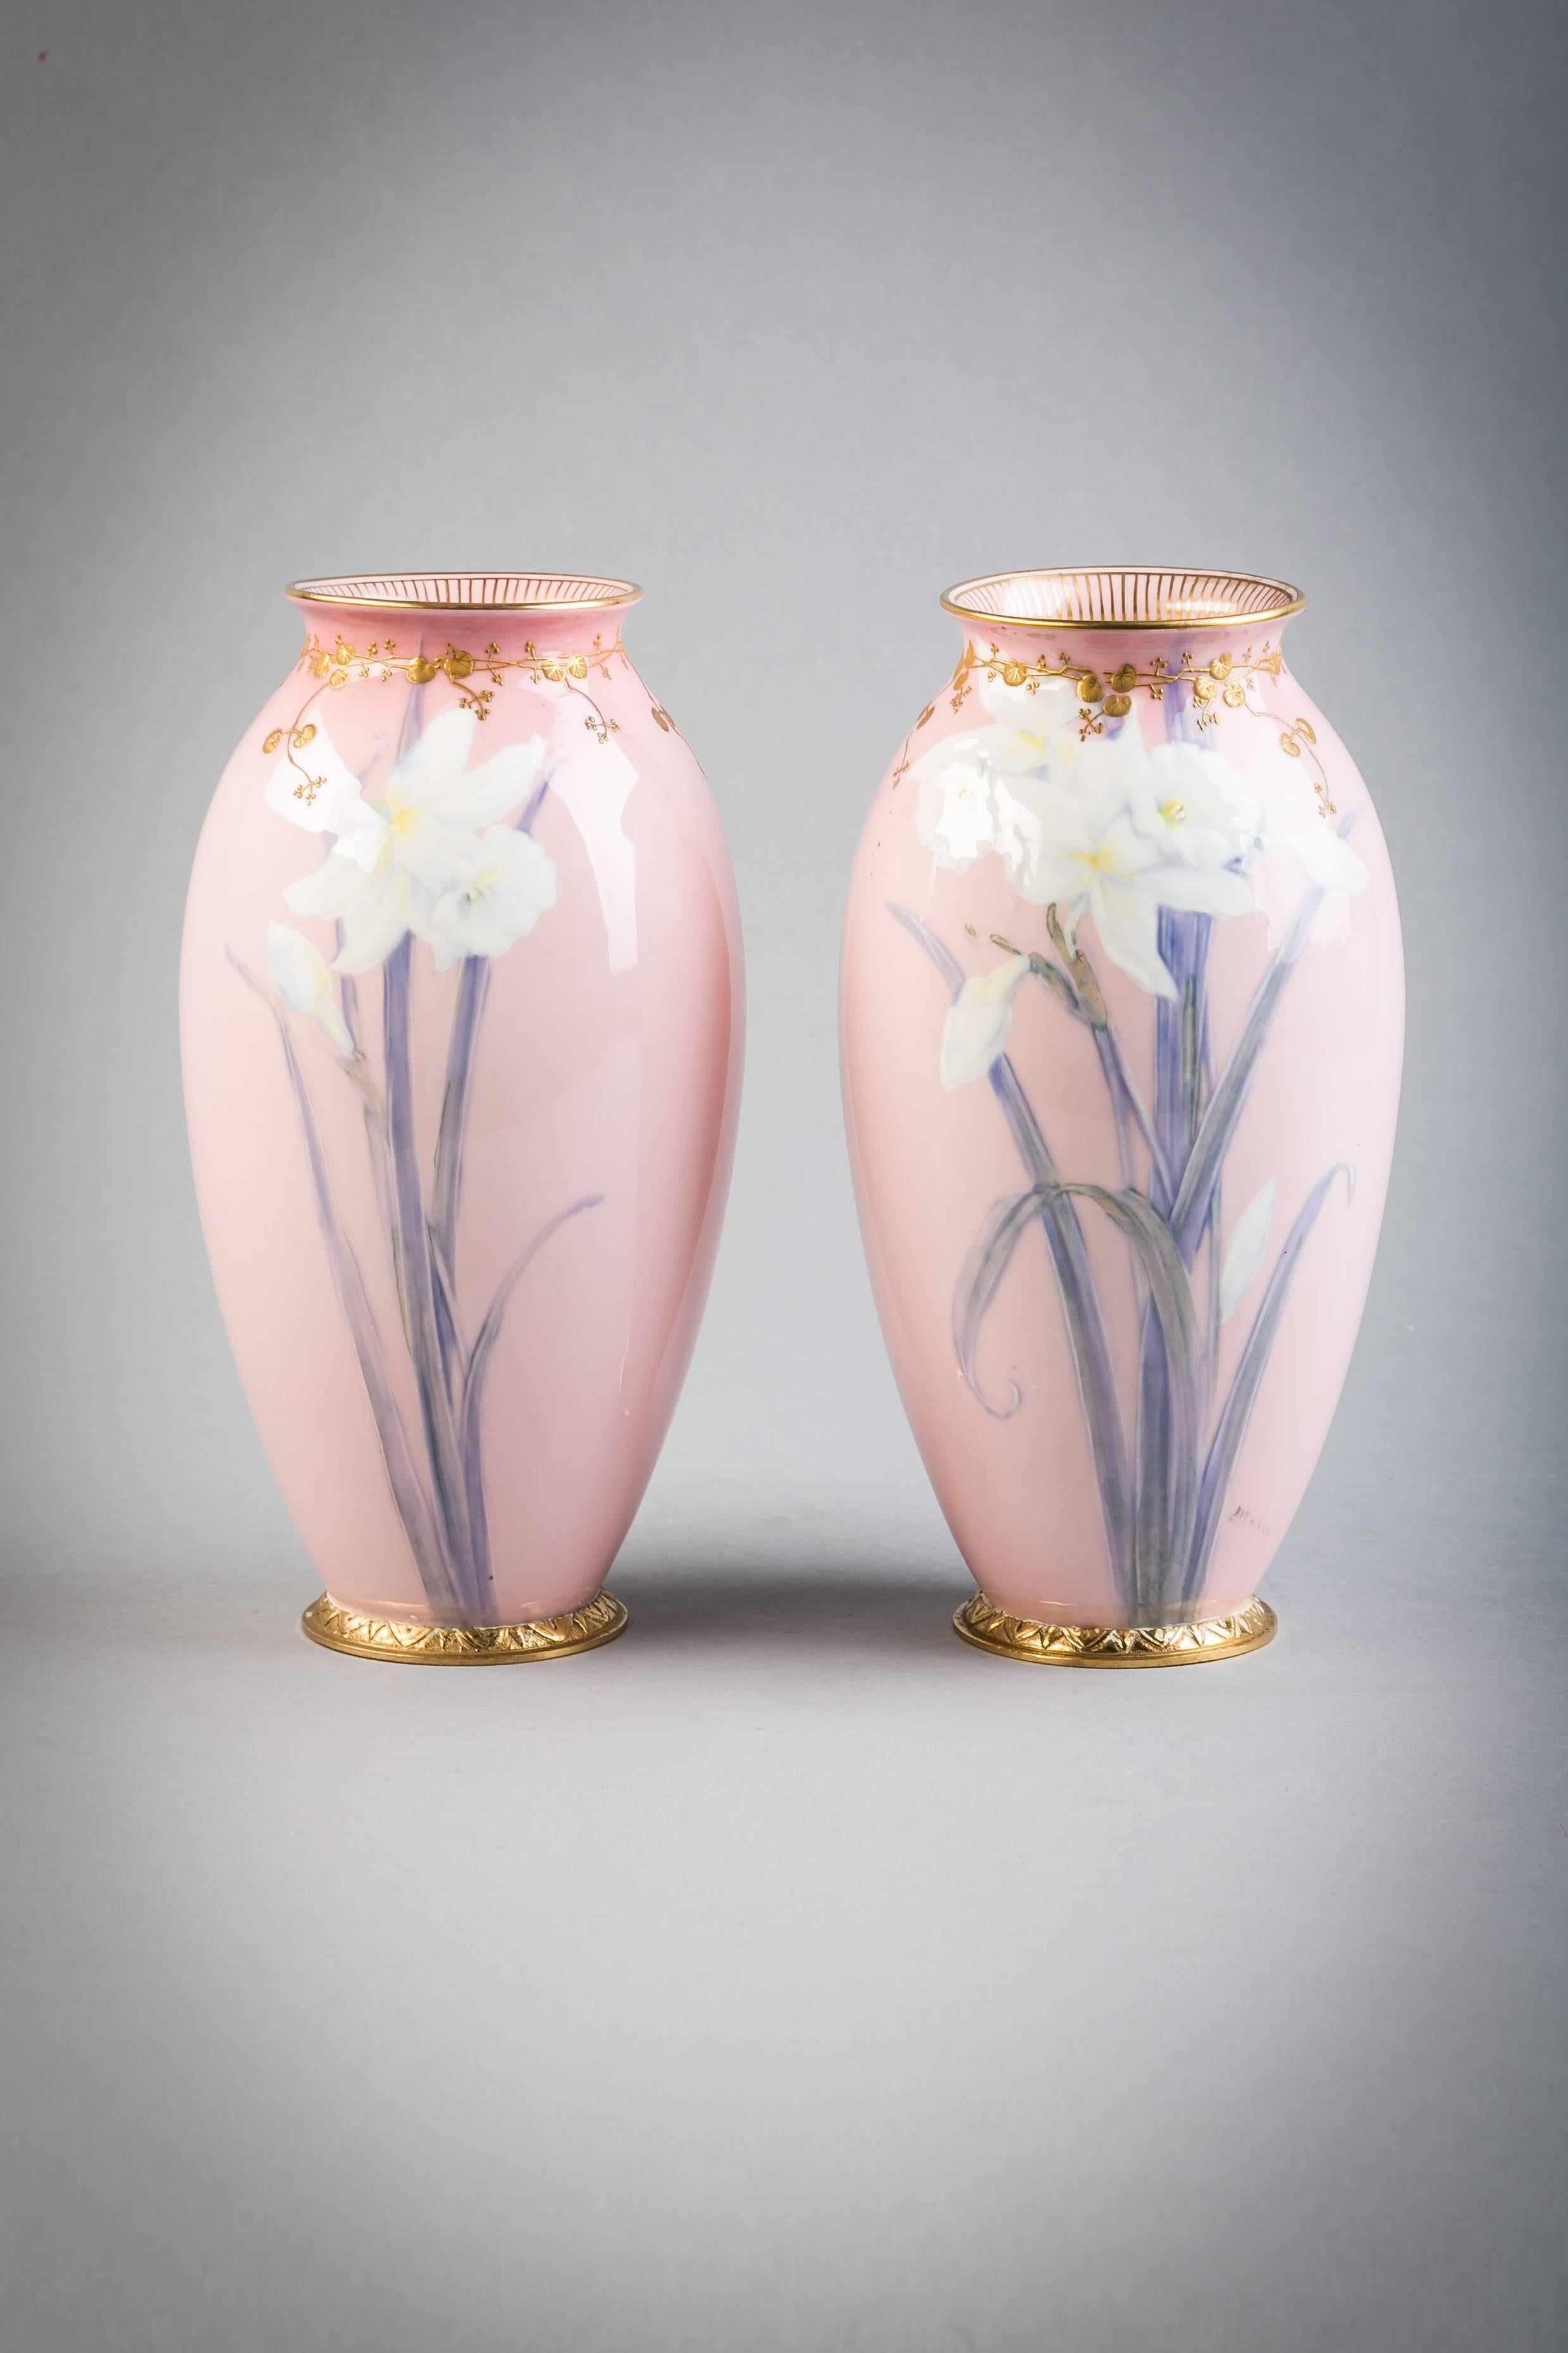 Pair of English Porcelain Gilt Bronze Mounted Pate-Sur-Pate Vases, circa 1900 For Sale 3